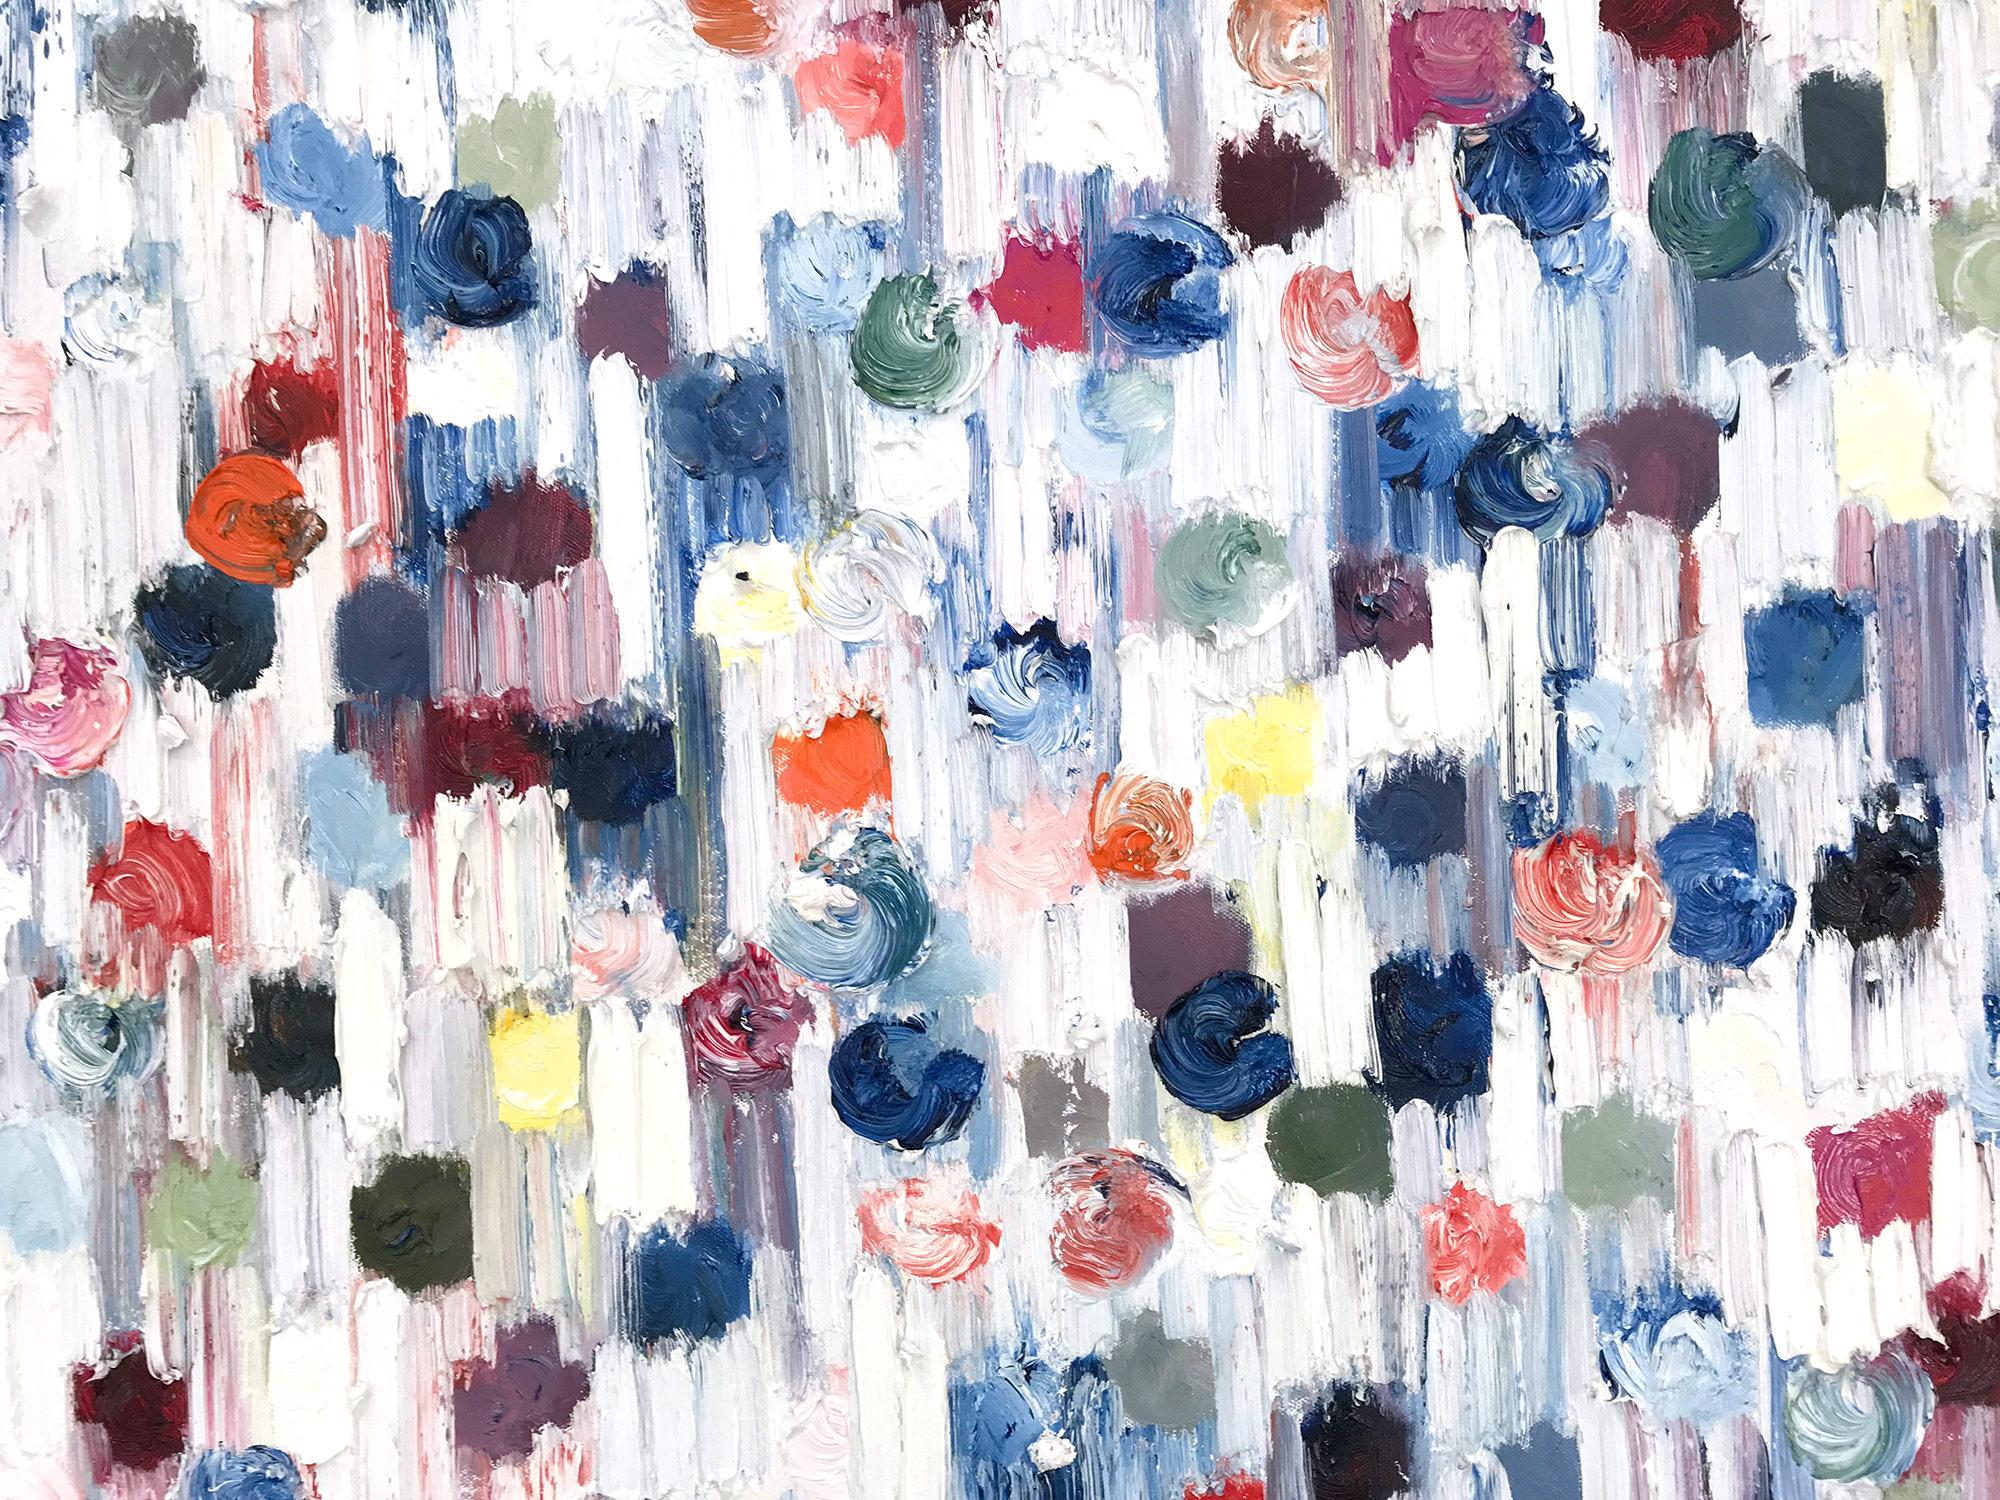 Dripping Dots, Cannes - Contemporary Painting by Cindy Shaoul